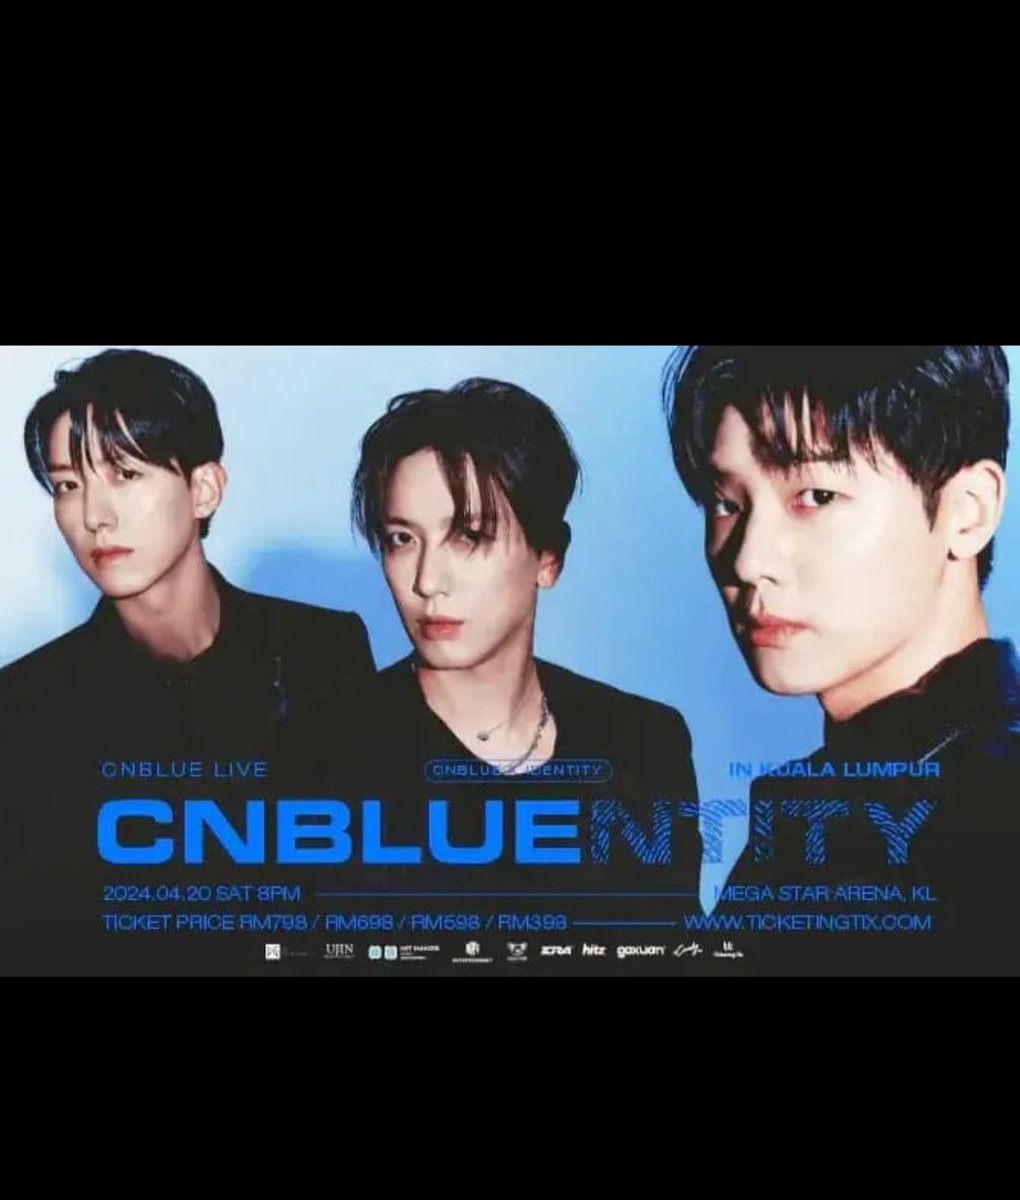 WTS
CNBLUENTITY IN SINGAPORE📍
Singapore Indoor Stadium
2 Tickets
27 April 2024
Cat 1 seated---$283
Section 213
Dm if interested 
#CNBLUENTITY #CNBLUE #CNBLUEBalikRaya #CNBLUEinKL #CNBLUEinMY #CNBLUENTITYinKL #CNBLUENTITYinMY #MYboice